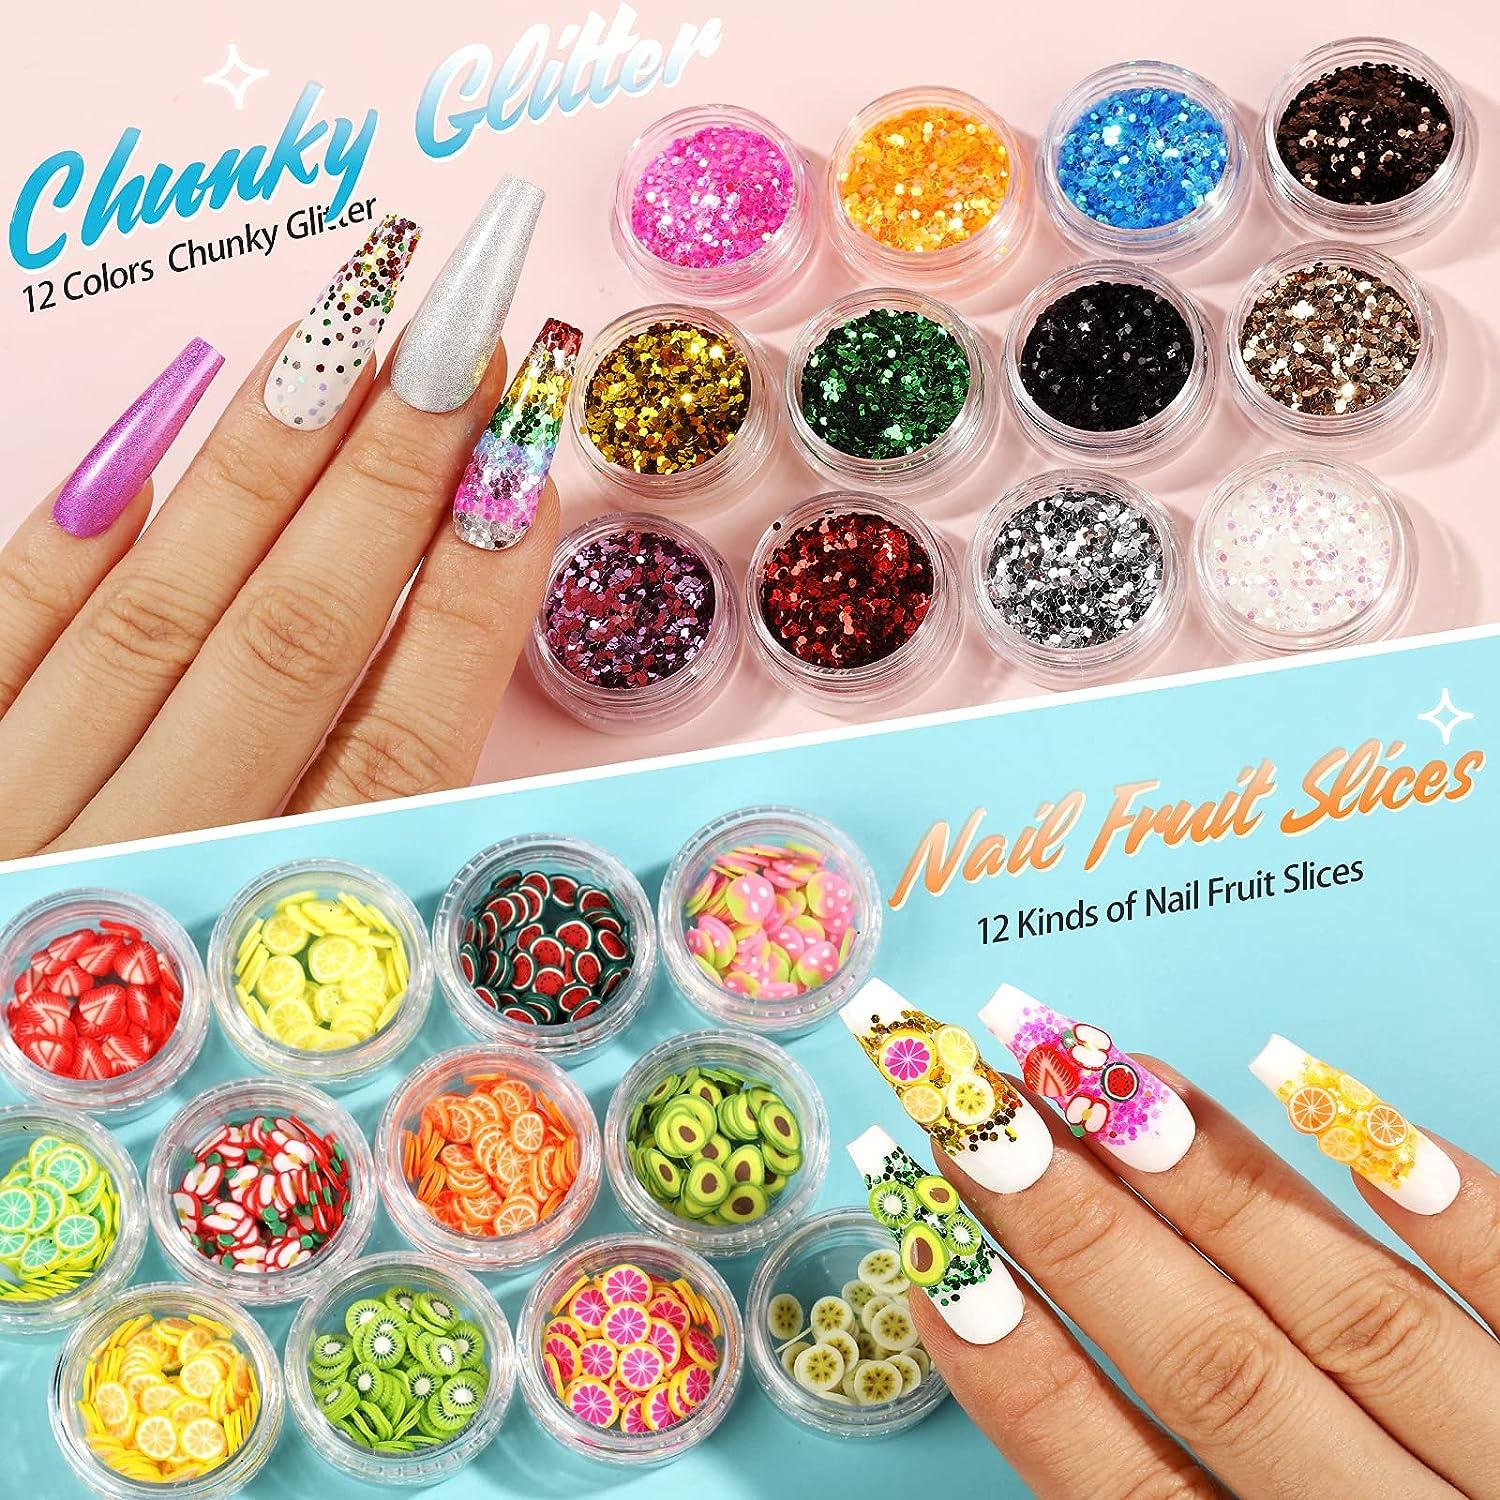 Nail Art Designs for Nails, Nail Foil Sticker, Nails Gems and Rhinestones,  Nail Art Fruit Slices , Chunky Glitter, Nail Sequins Laser Star,  Holographic Sparky Mixed Heart,Nail Decorations Set B